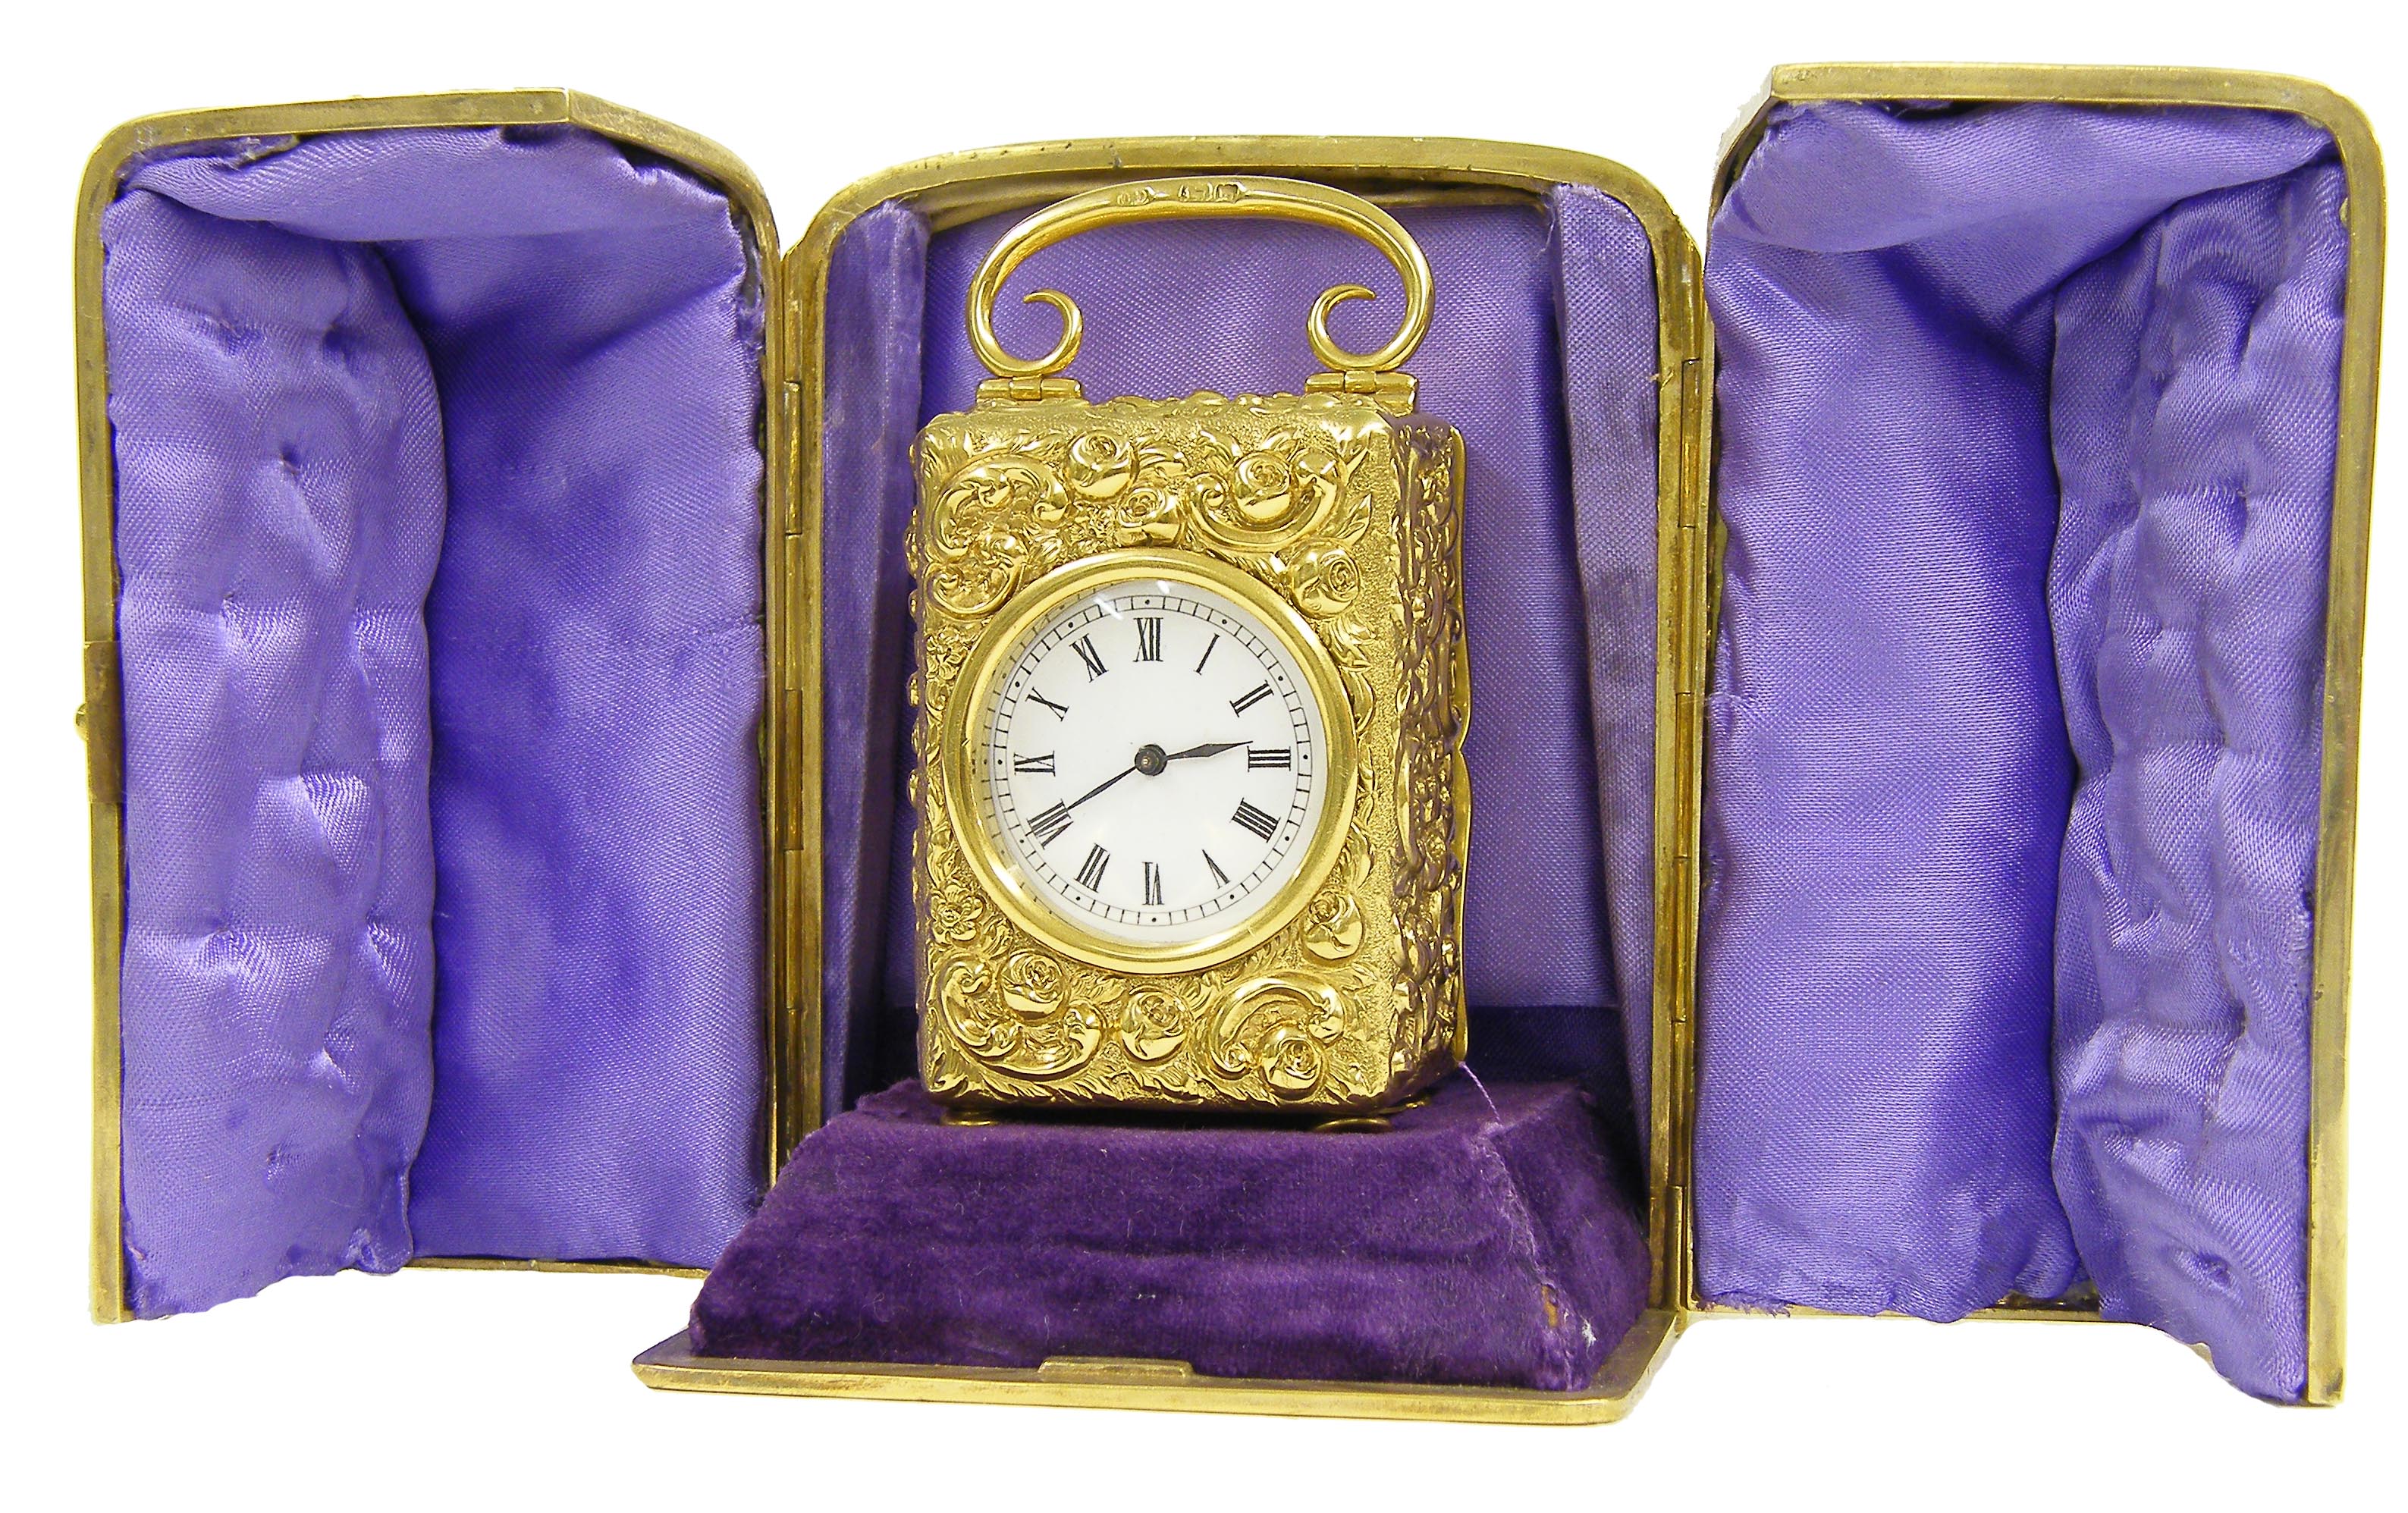 English silver gilt miniature carriage clock timepiece with French movement, the 1.25" white dial